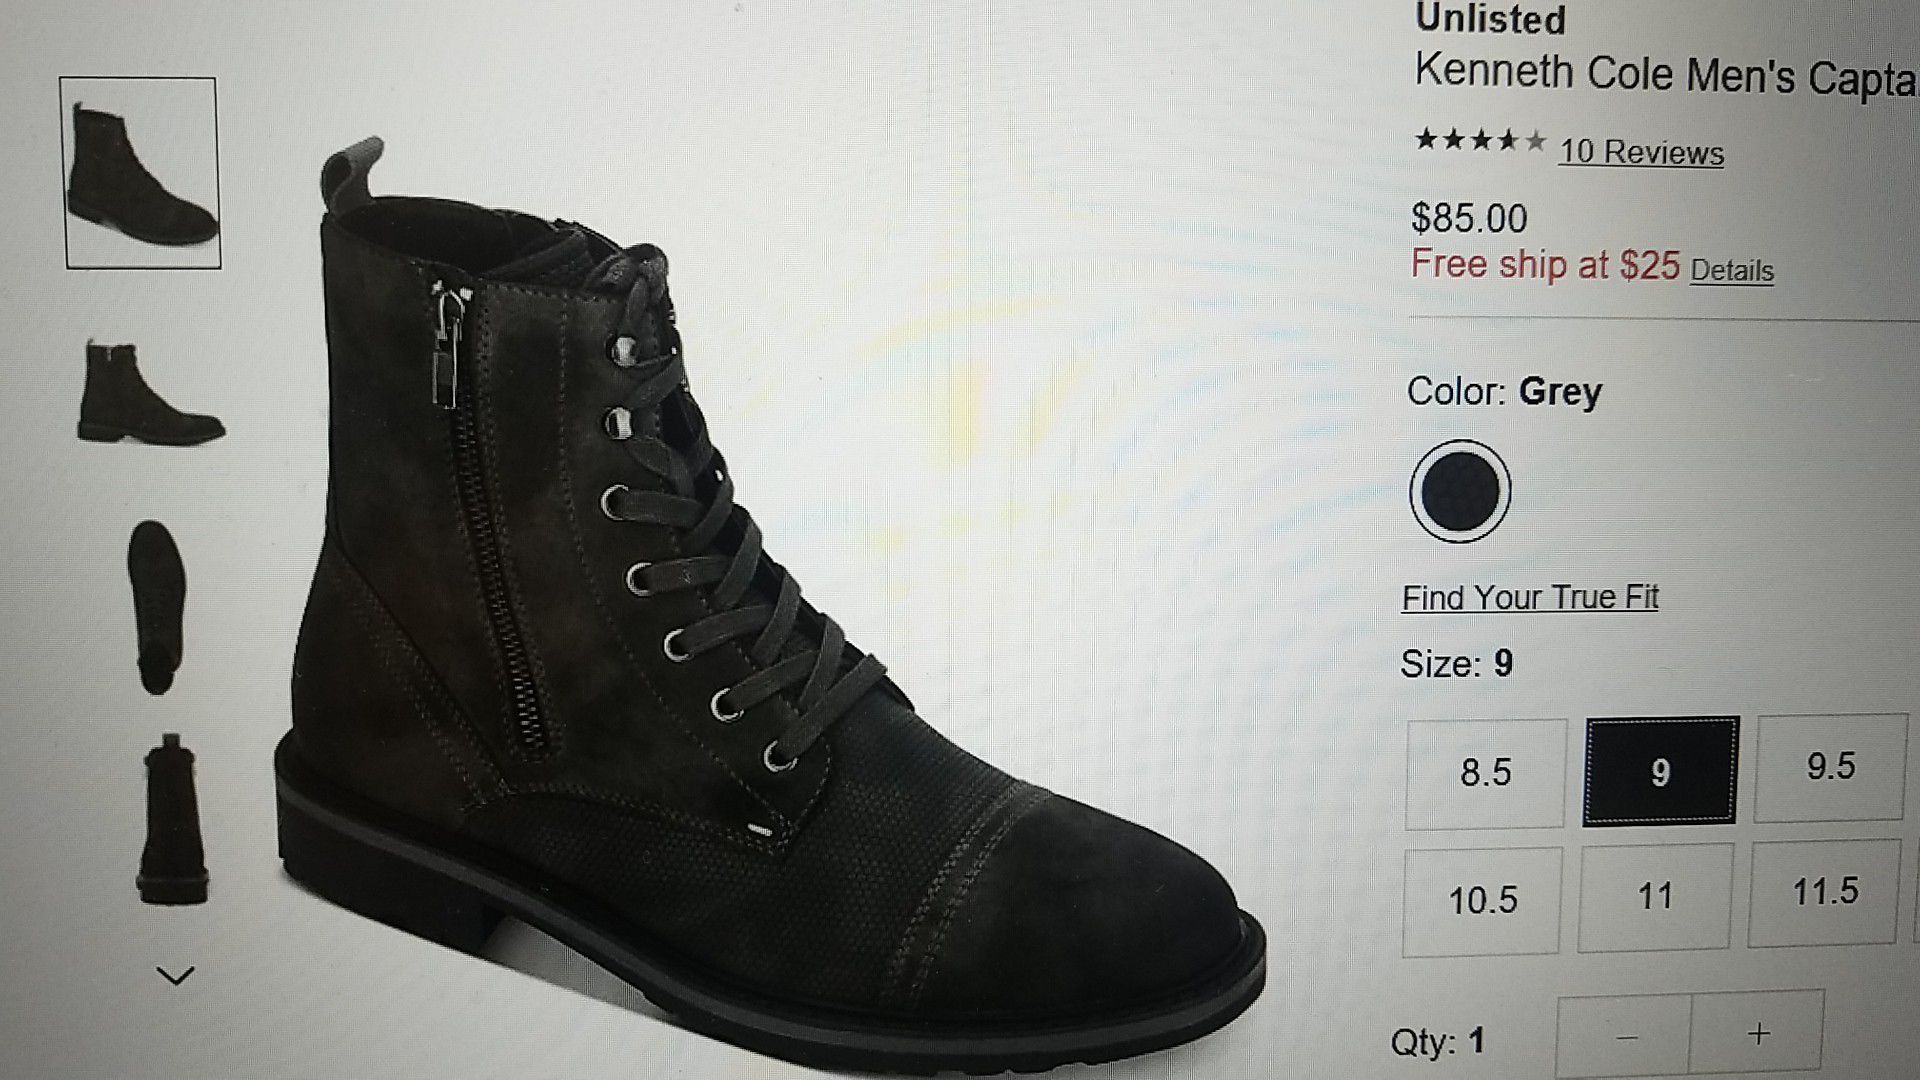 Unlisted Kenneth Cole Boots